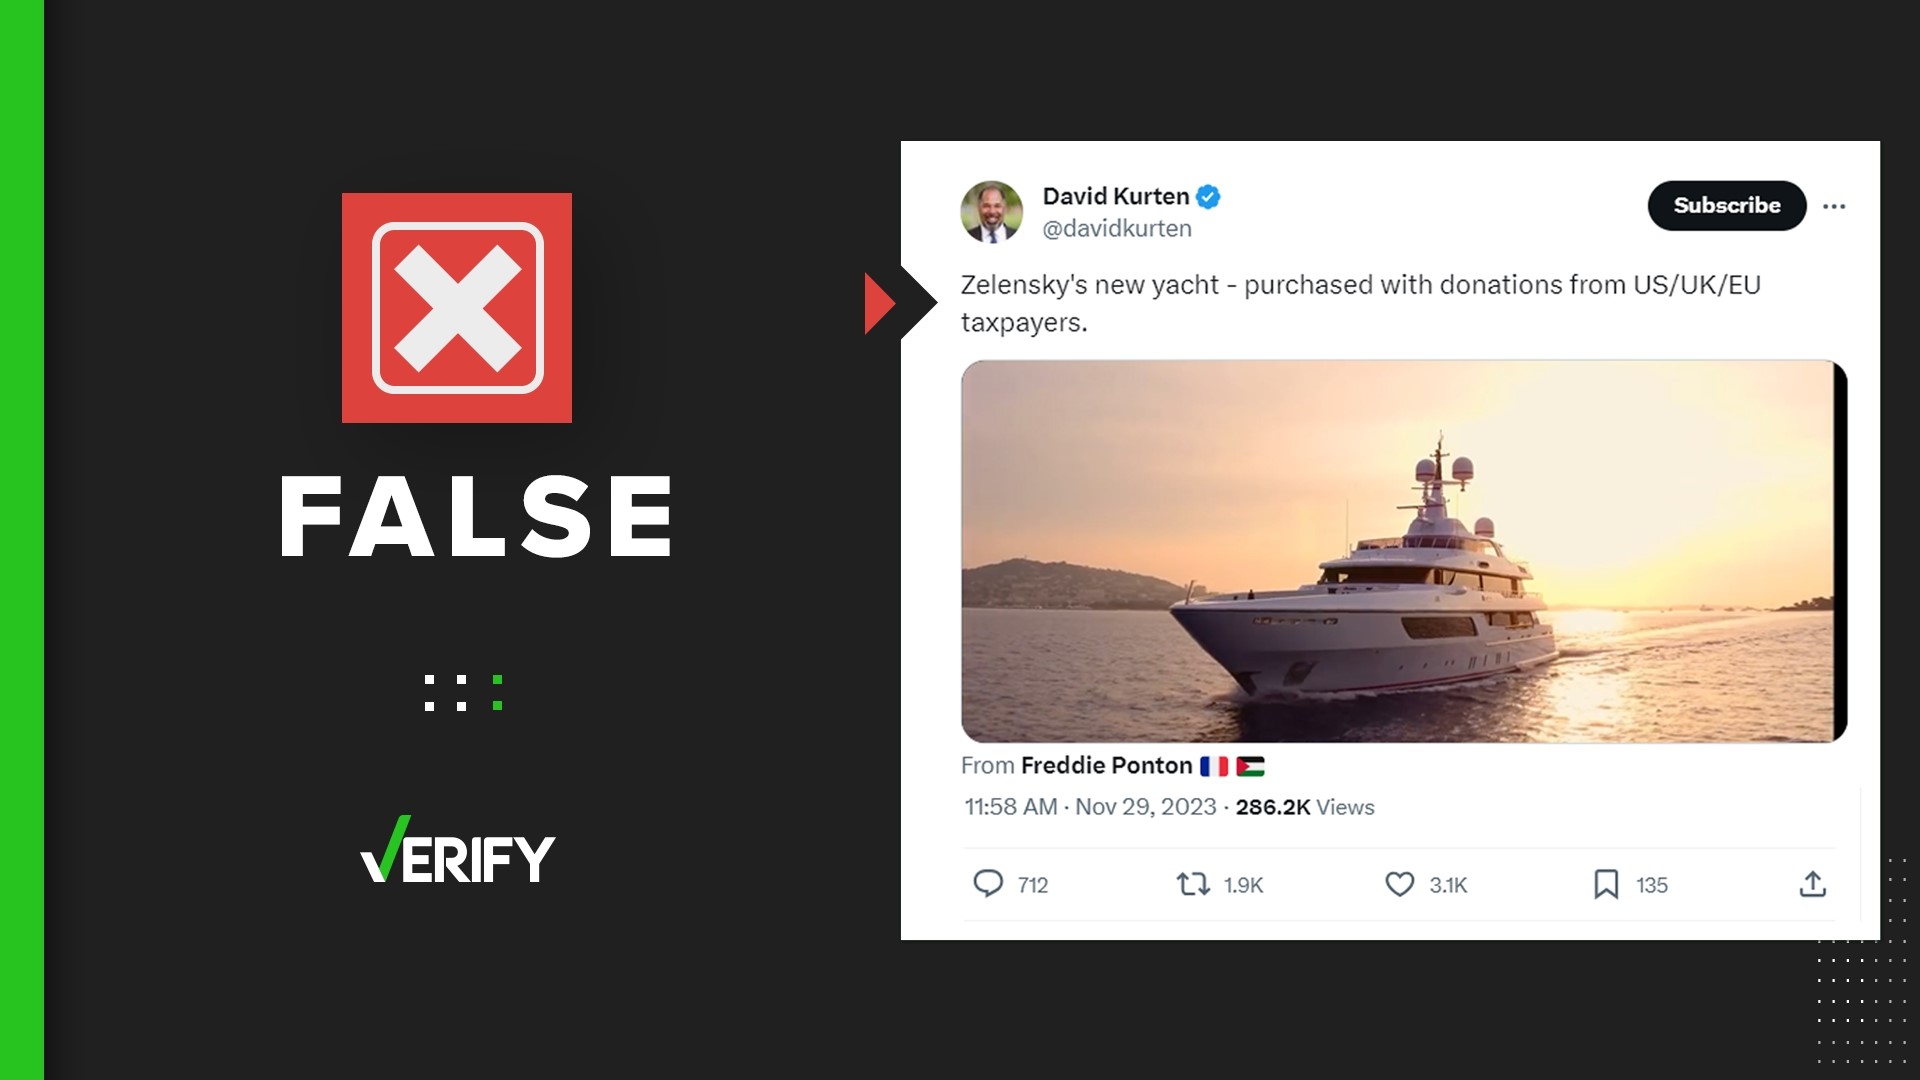 Some social media posts falsely claim Zelenskyy bought two superyachts, MY LEGACY and Lucky Me, using foreign aid funds. The yachts are still for sale.